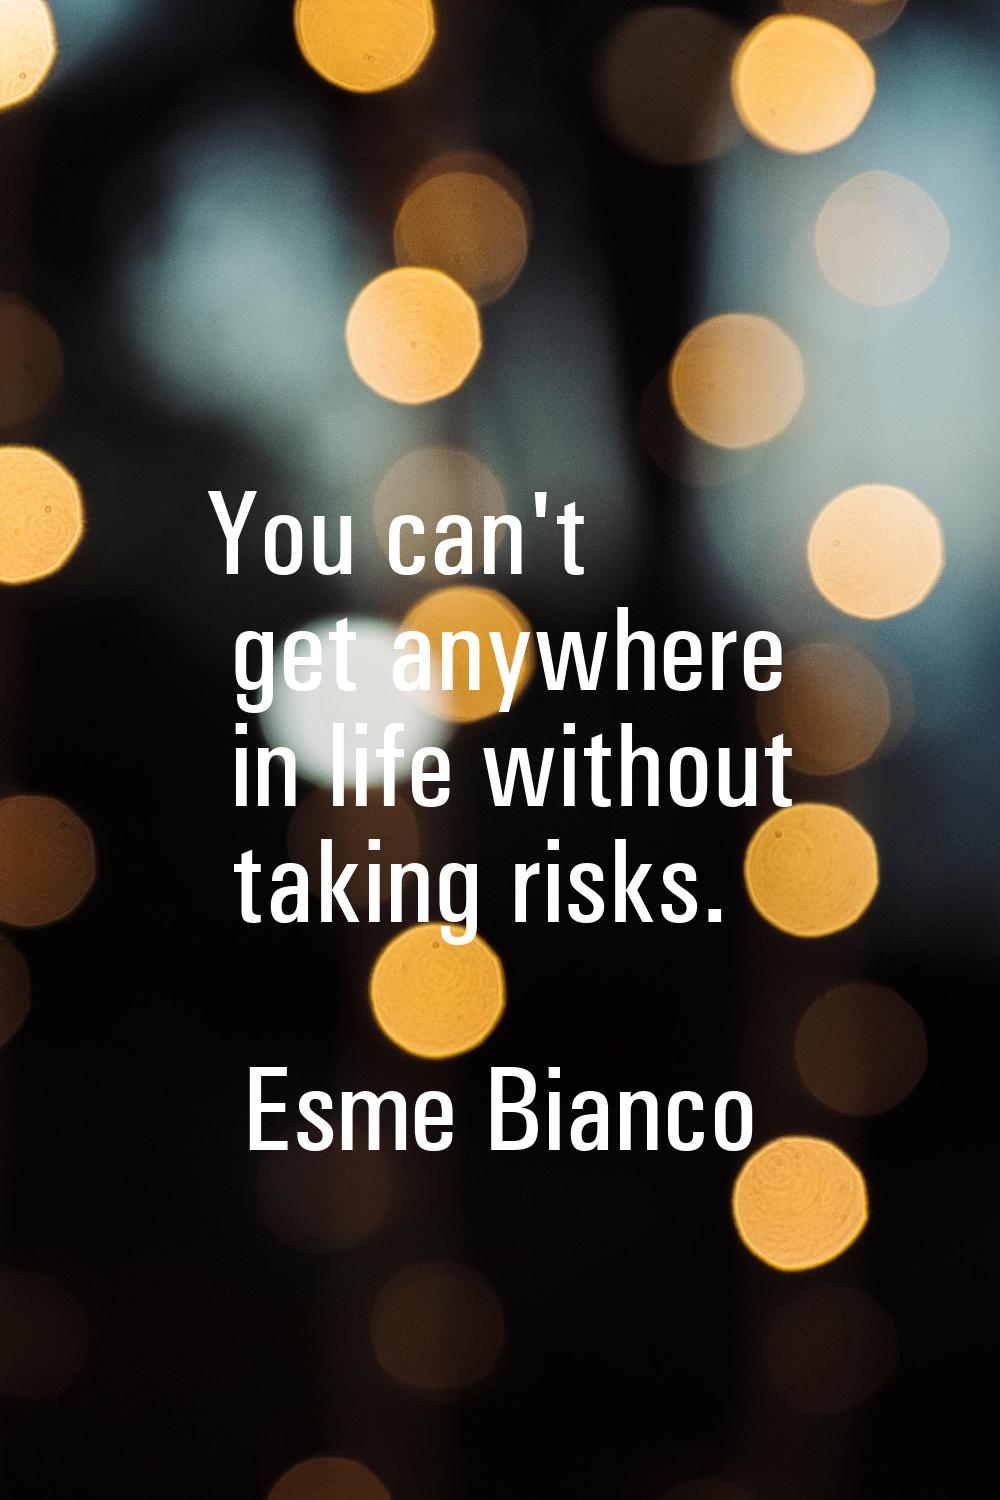 You can't get anywhere in life without taking risks.